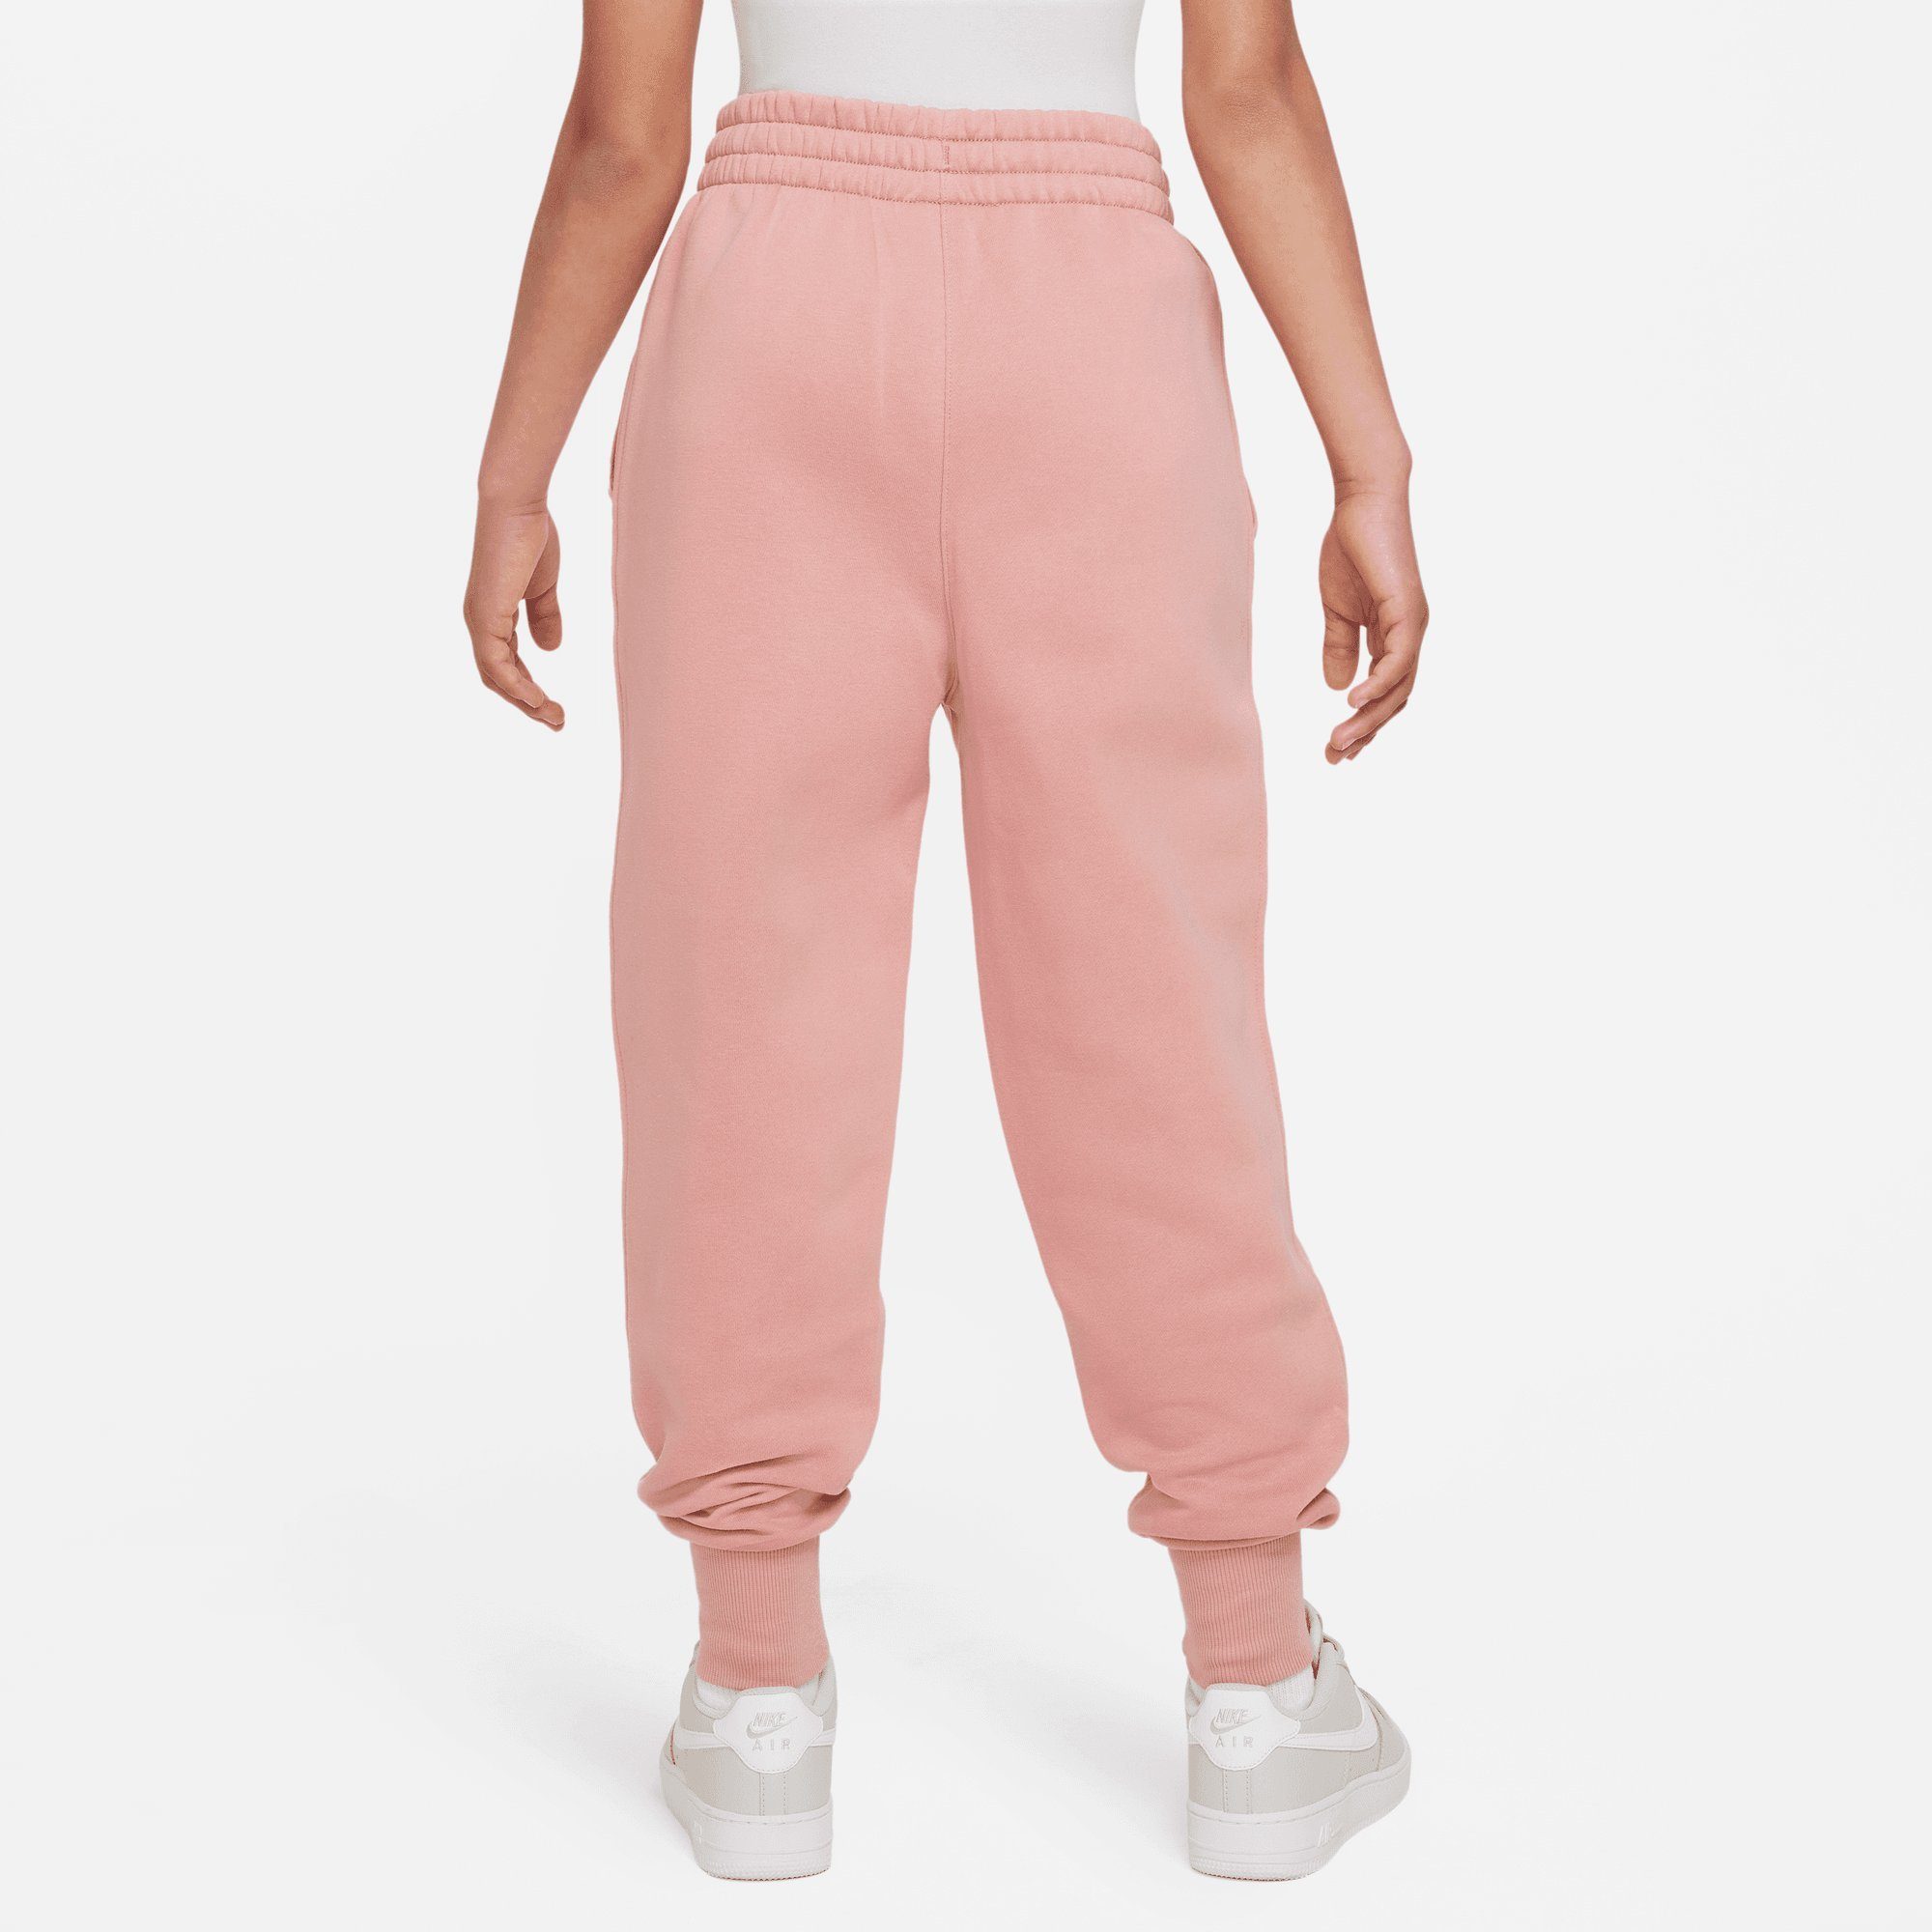 Jogginghose FLEECE RED (GIRLS) CLUB HIGH-WAISTED Nike BIG STARDUST/WHITE FITTED STARDUST/RED KIDS' PANTS Sportswear